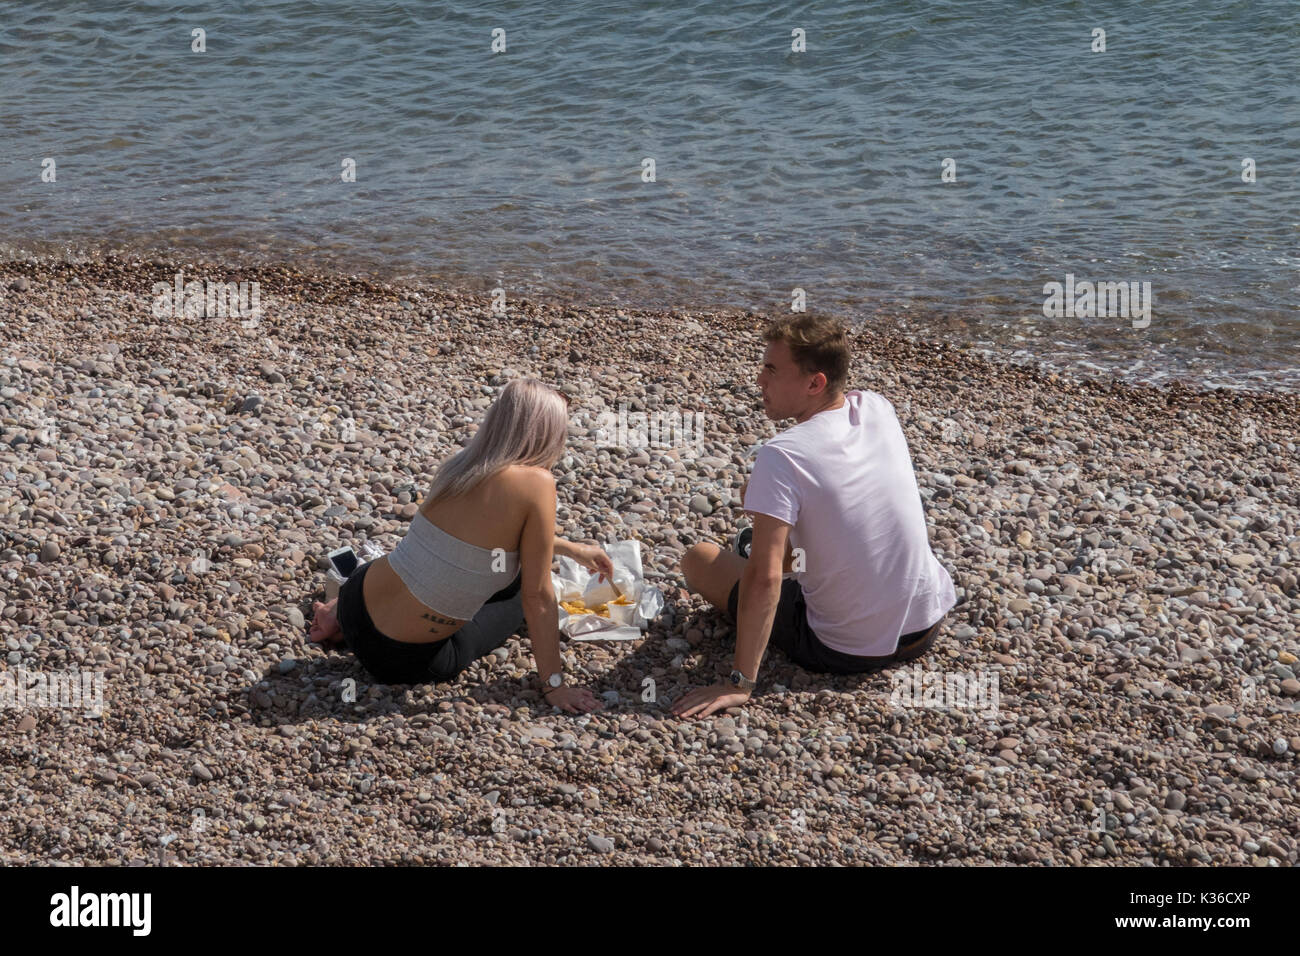 Sidmouth 1st Sept 17    Glorious weather on the Devon coast on the first day of autumn. A couple enjoy a traditional English meal on Sidmouth beach. Credit: Photo Central / Alamy Live News Stock Photo